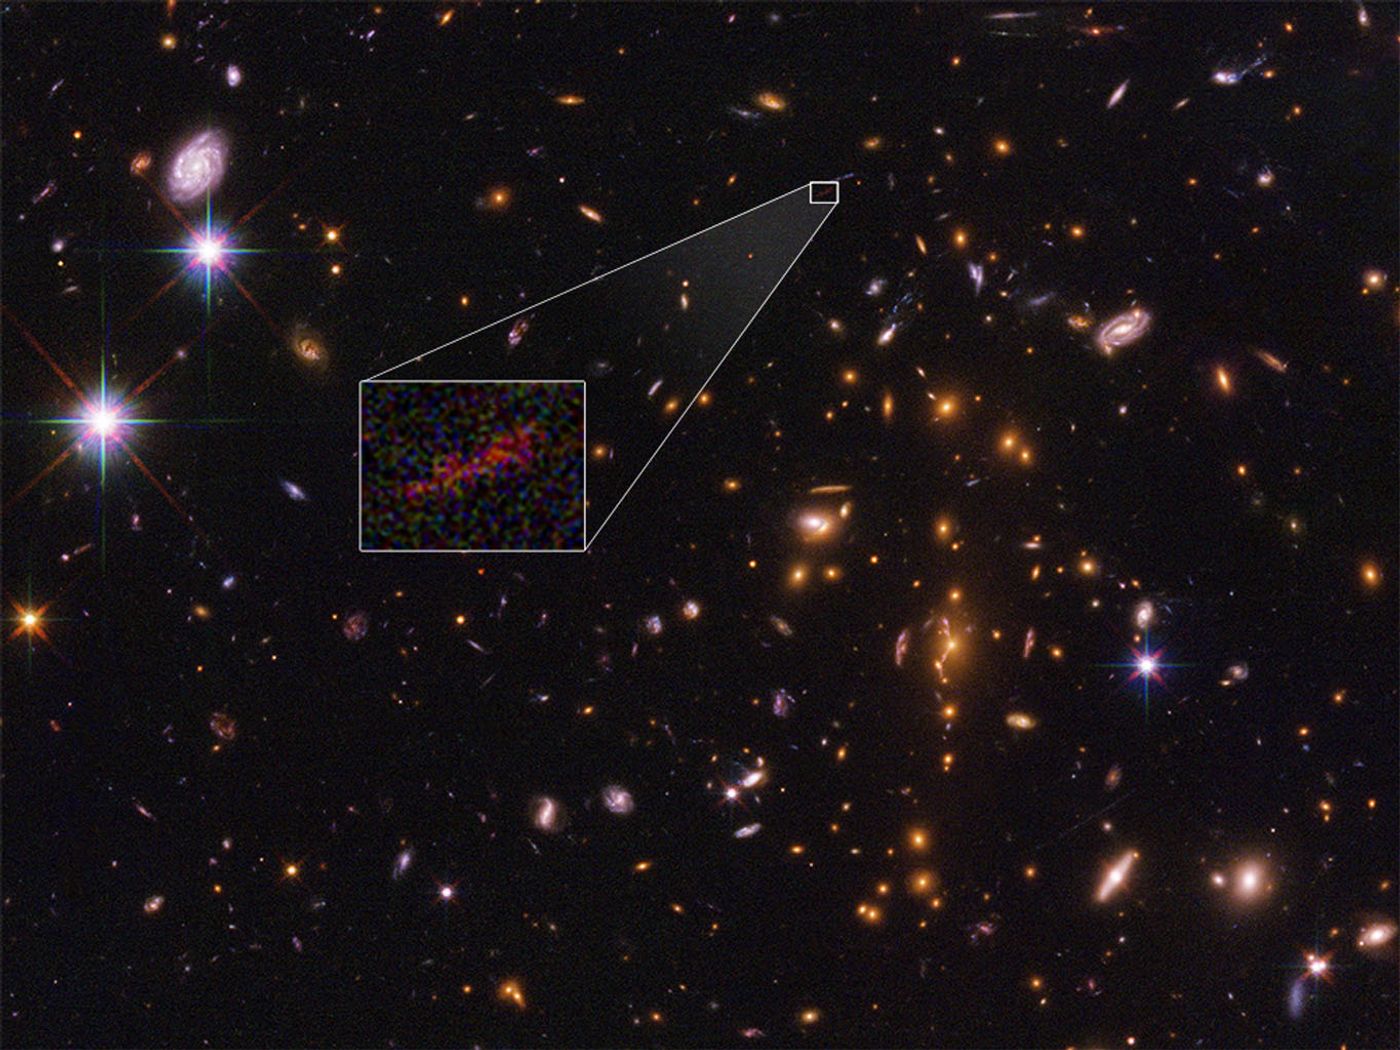 SPT0615-JD is seen in this Hubble photograph.